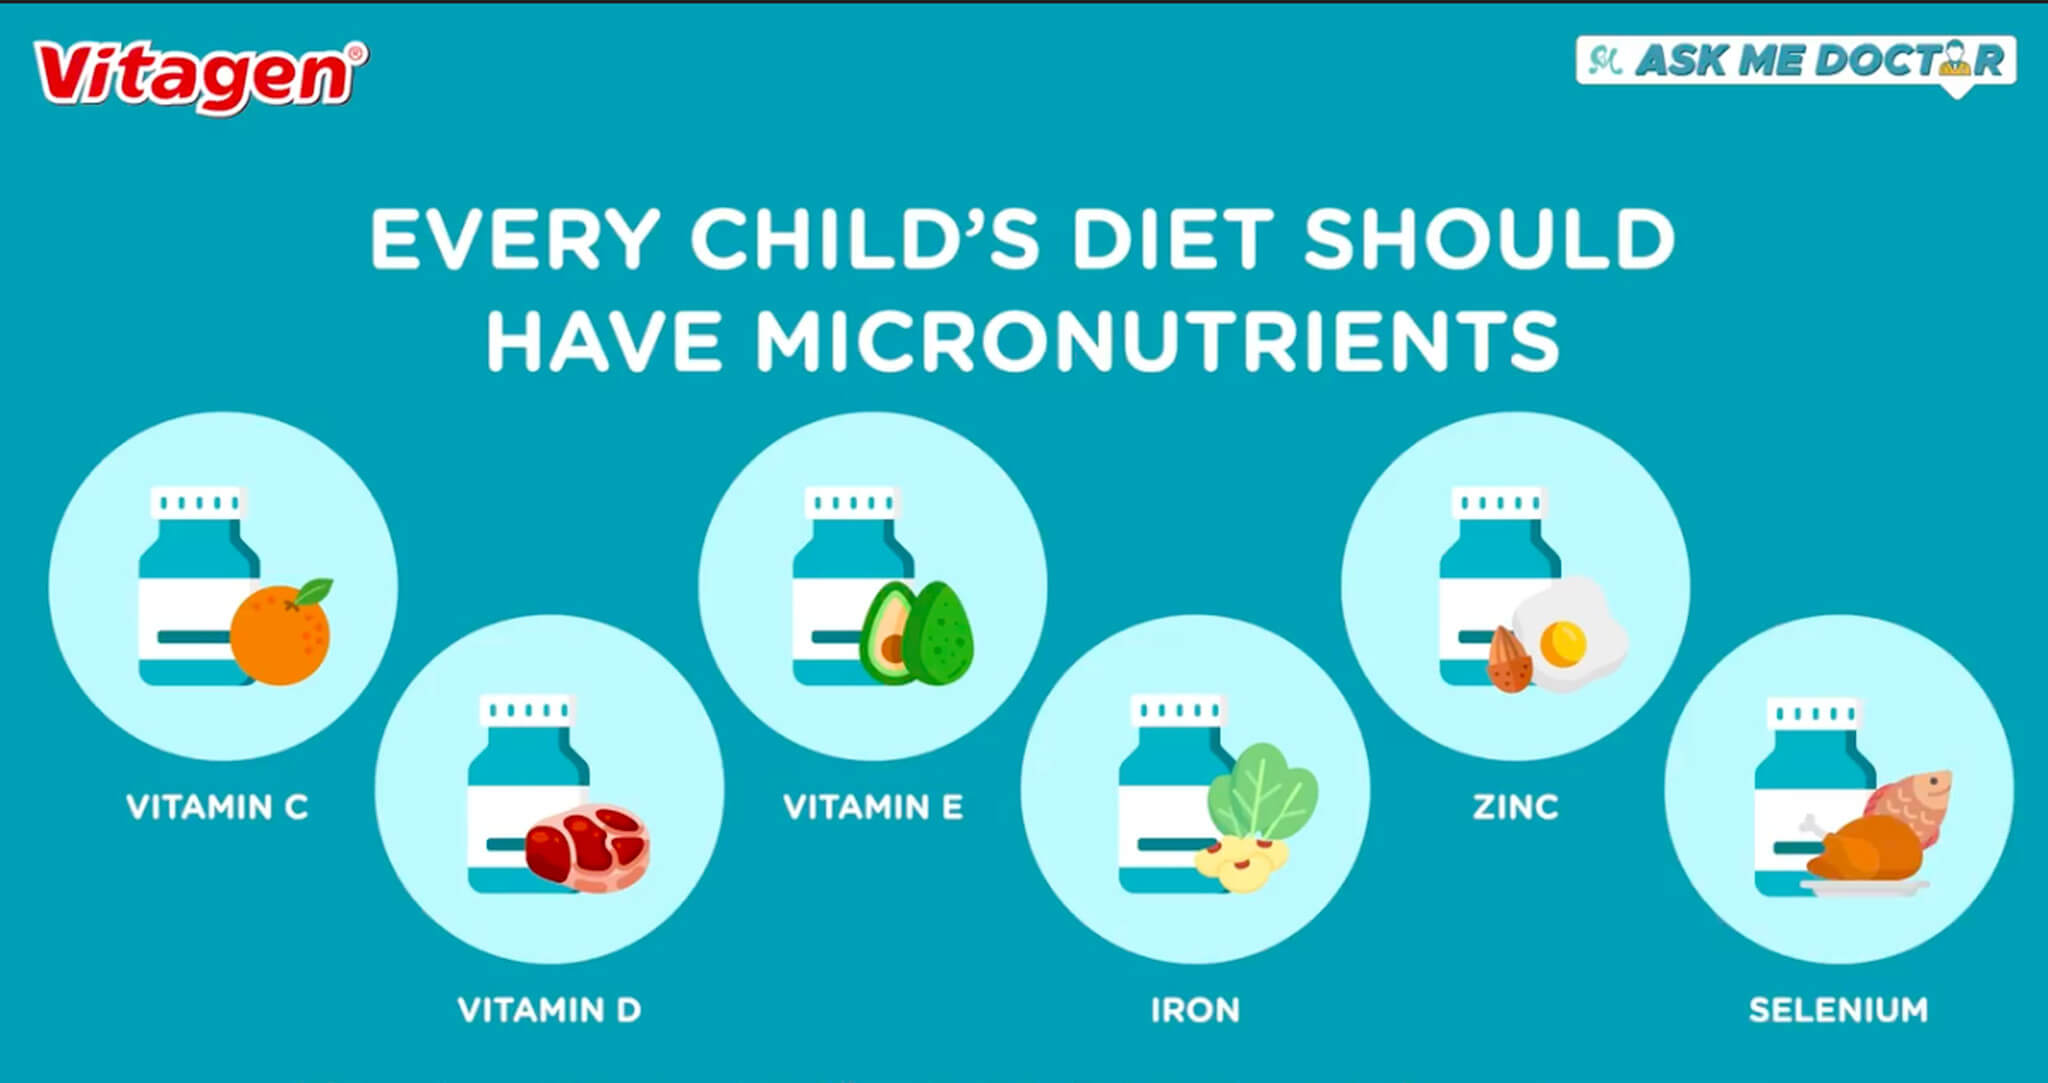 Micronutrients that every child's diet should contain